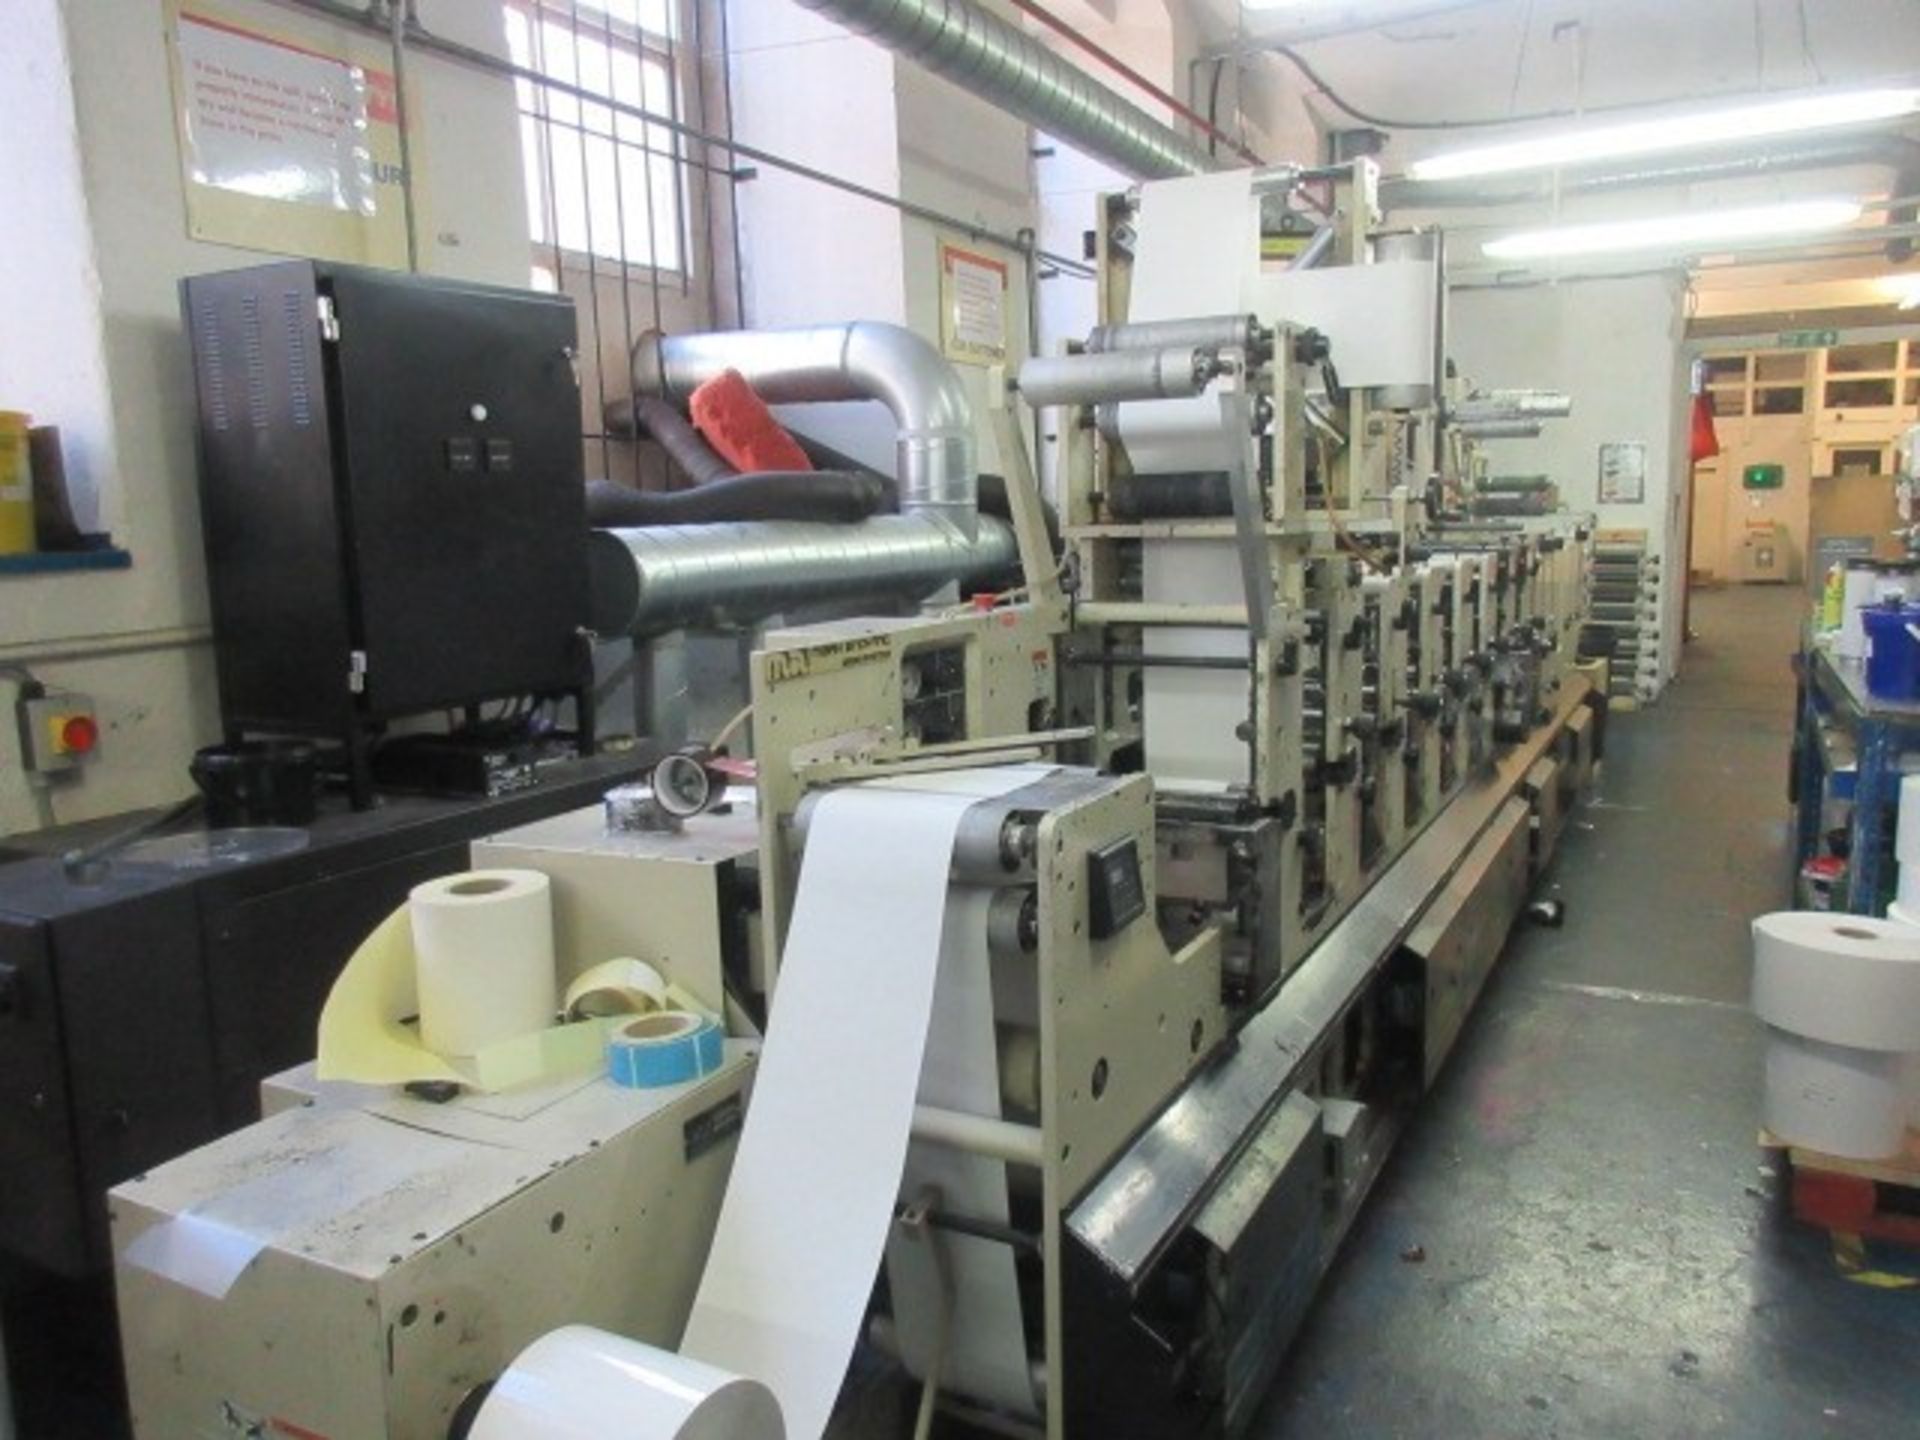 Mark Andy 2200-10F 10” 8 colour flexographic label printing press. Serial no: 1260086 (2002) - Image 120 of 383